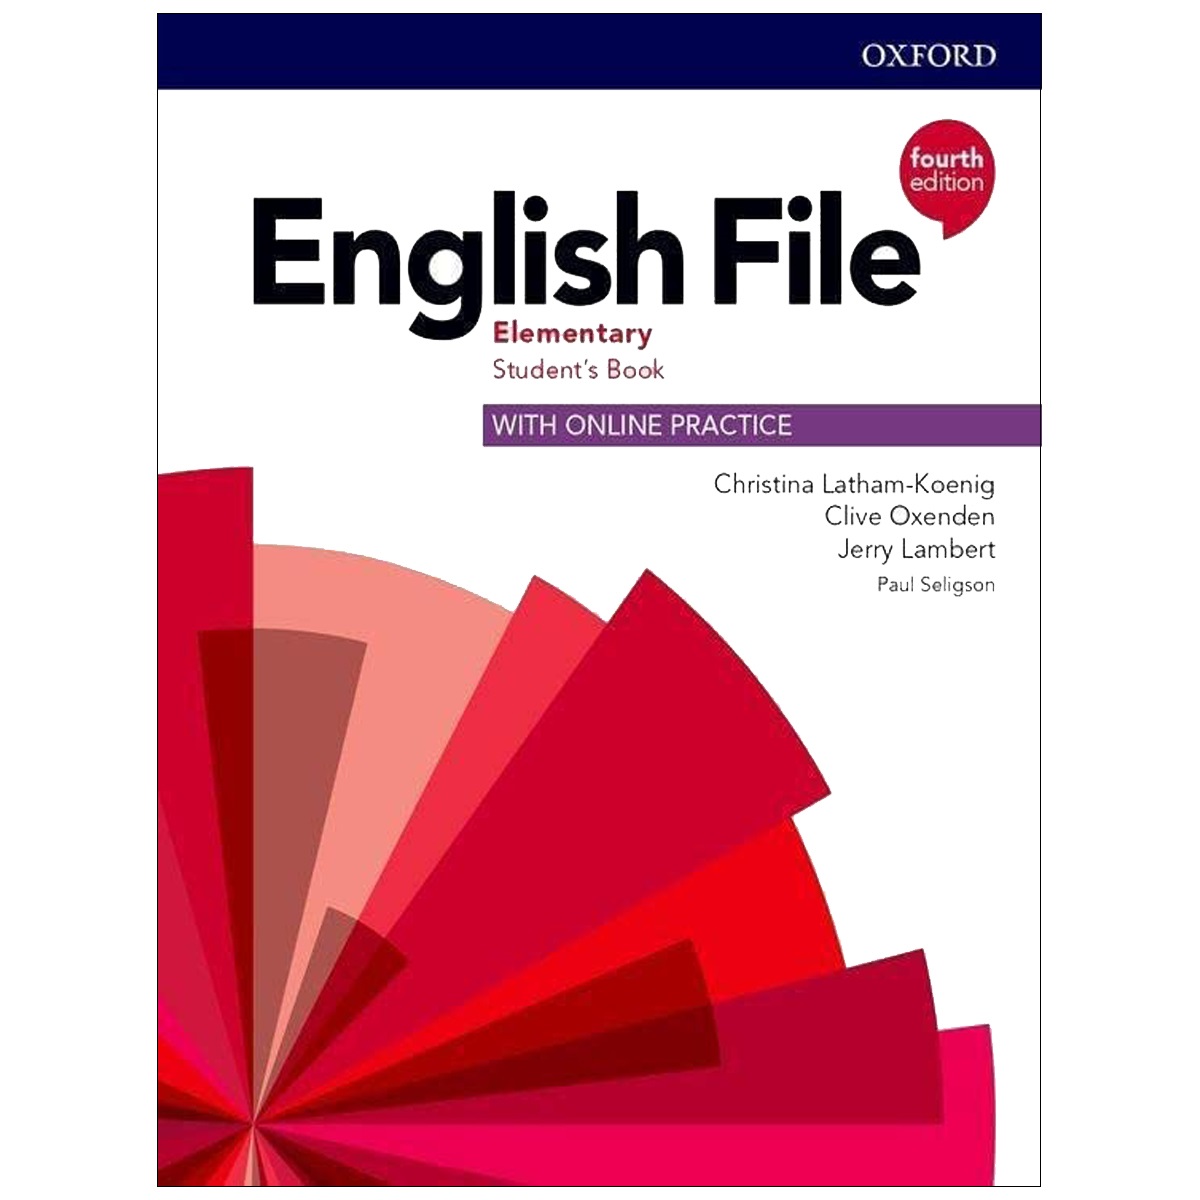 Elementary books oxford. English file Elementary 4th Edition. English file 4 Edition Elementary. English file Elementary fourth Edition. New English file Elementary student's book.